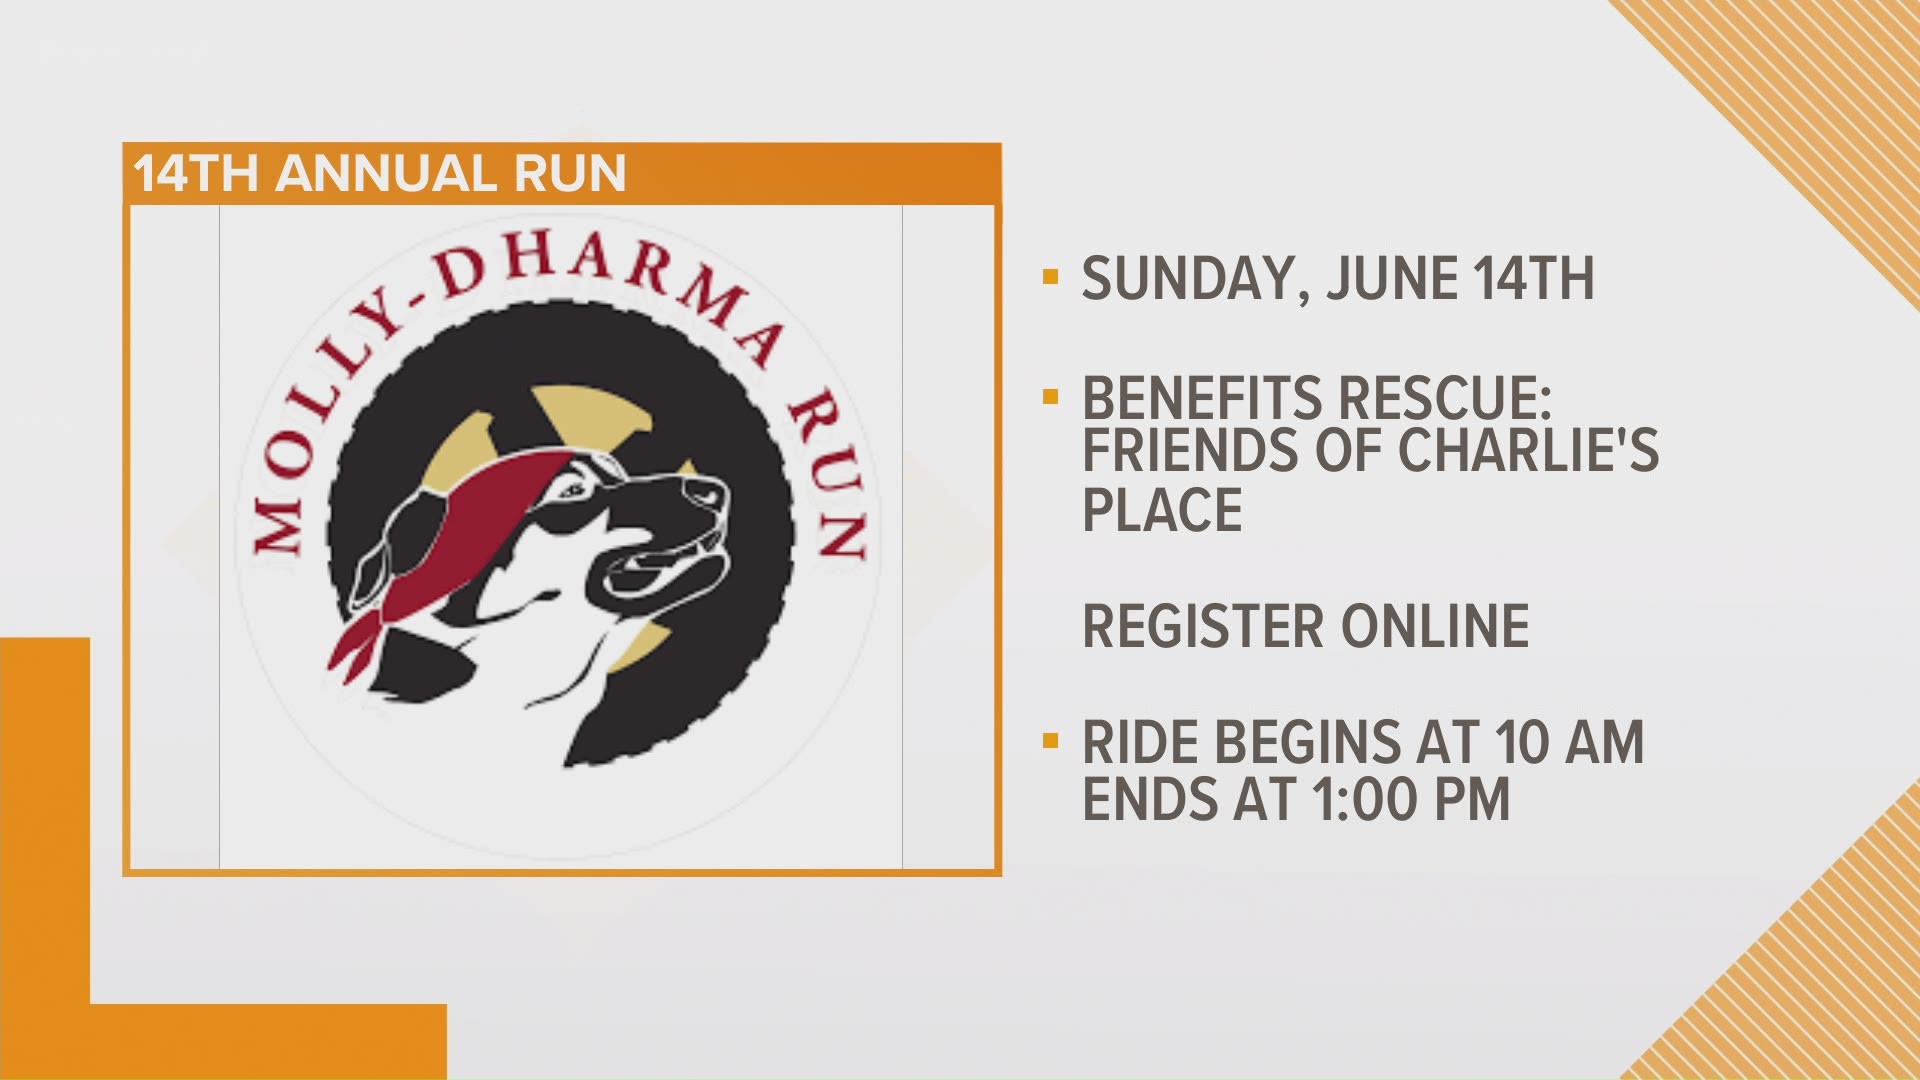 Organizers of the 14th annual Molly Dharma Motorcycle Run will happen on June 14 and will benefit A Friend of Charlie's Place.